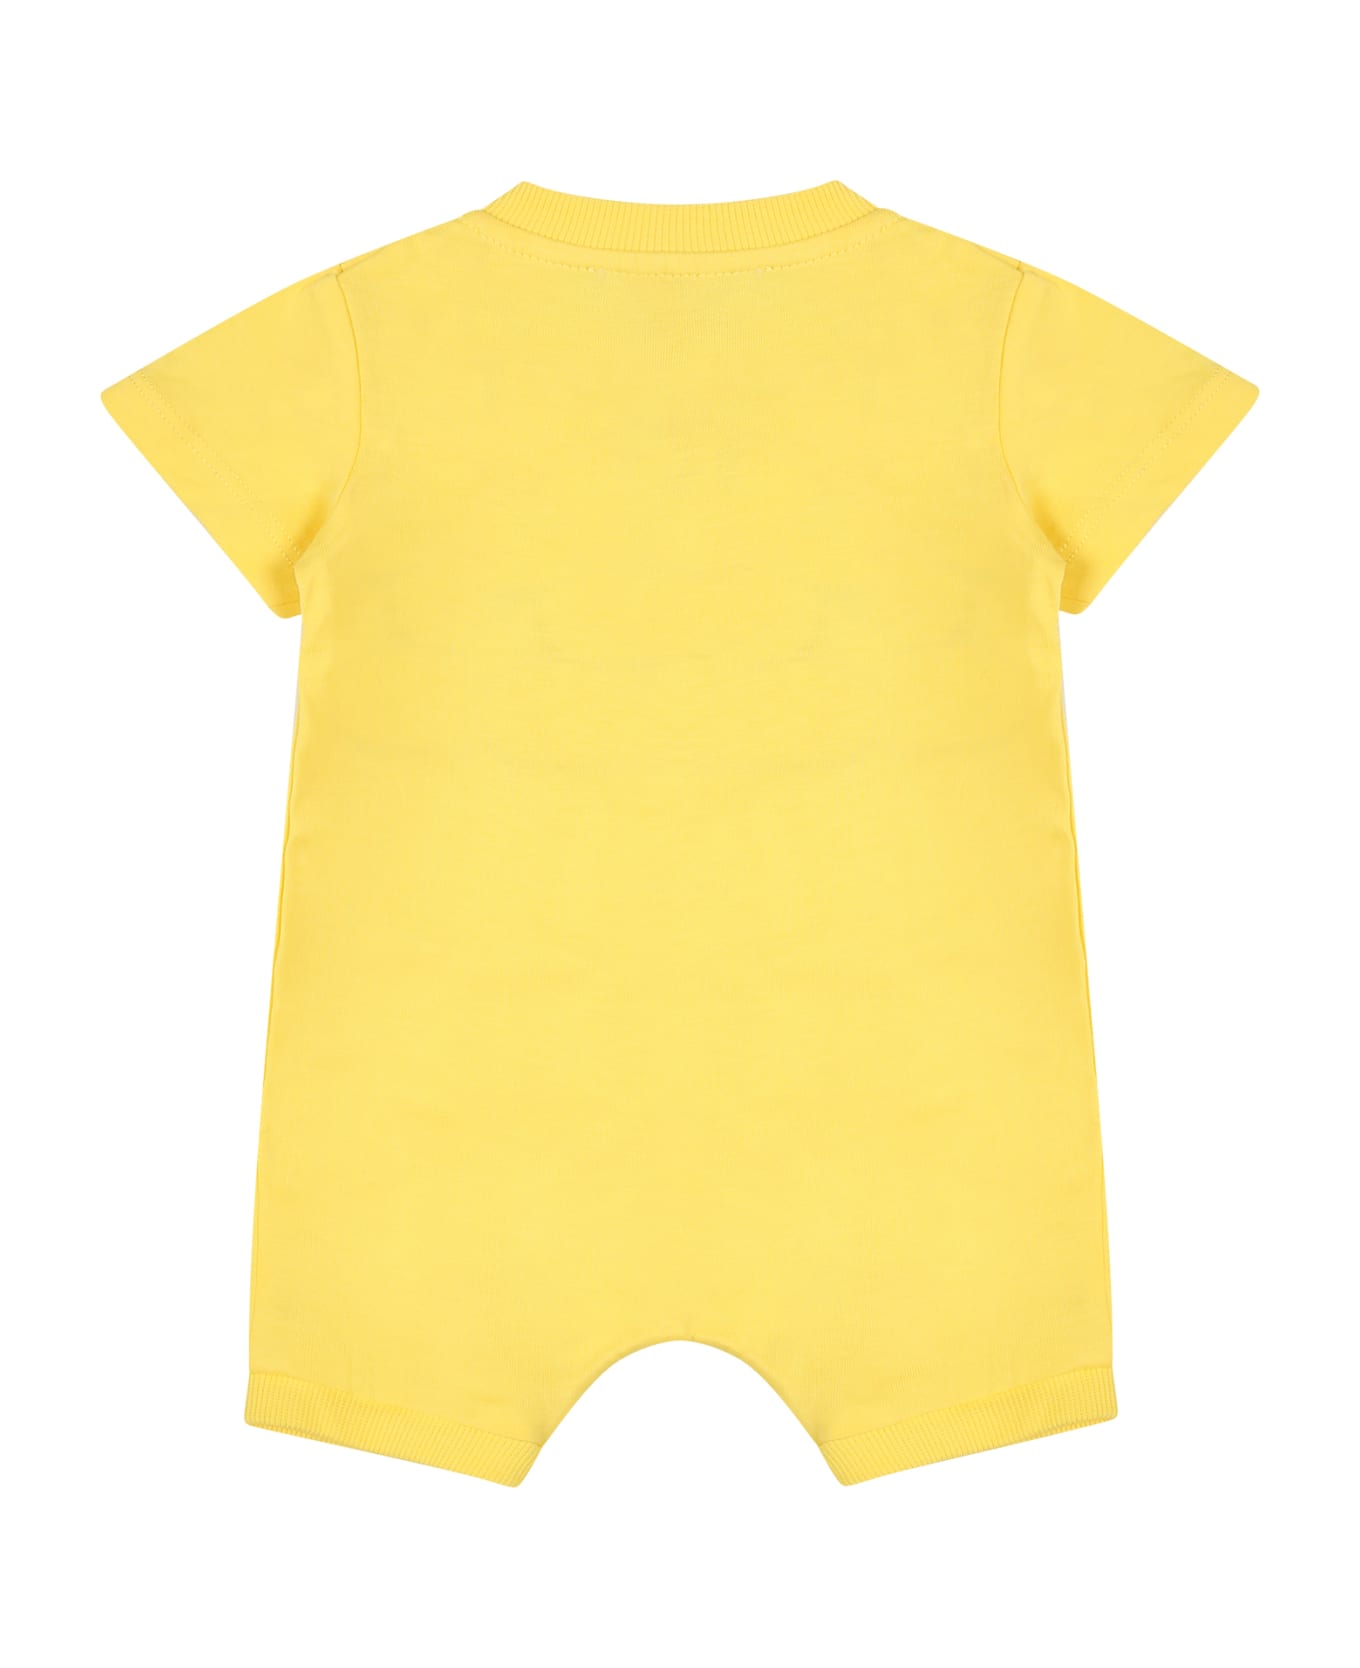 Moschino Yellow Romper For Baby Kids With Teddy Bear - Yellow